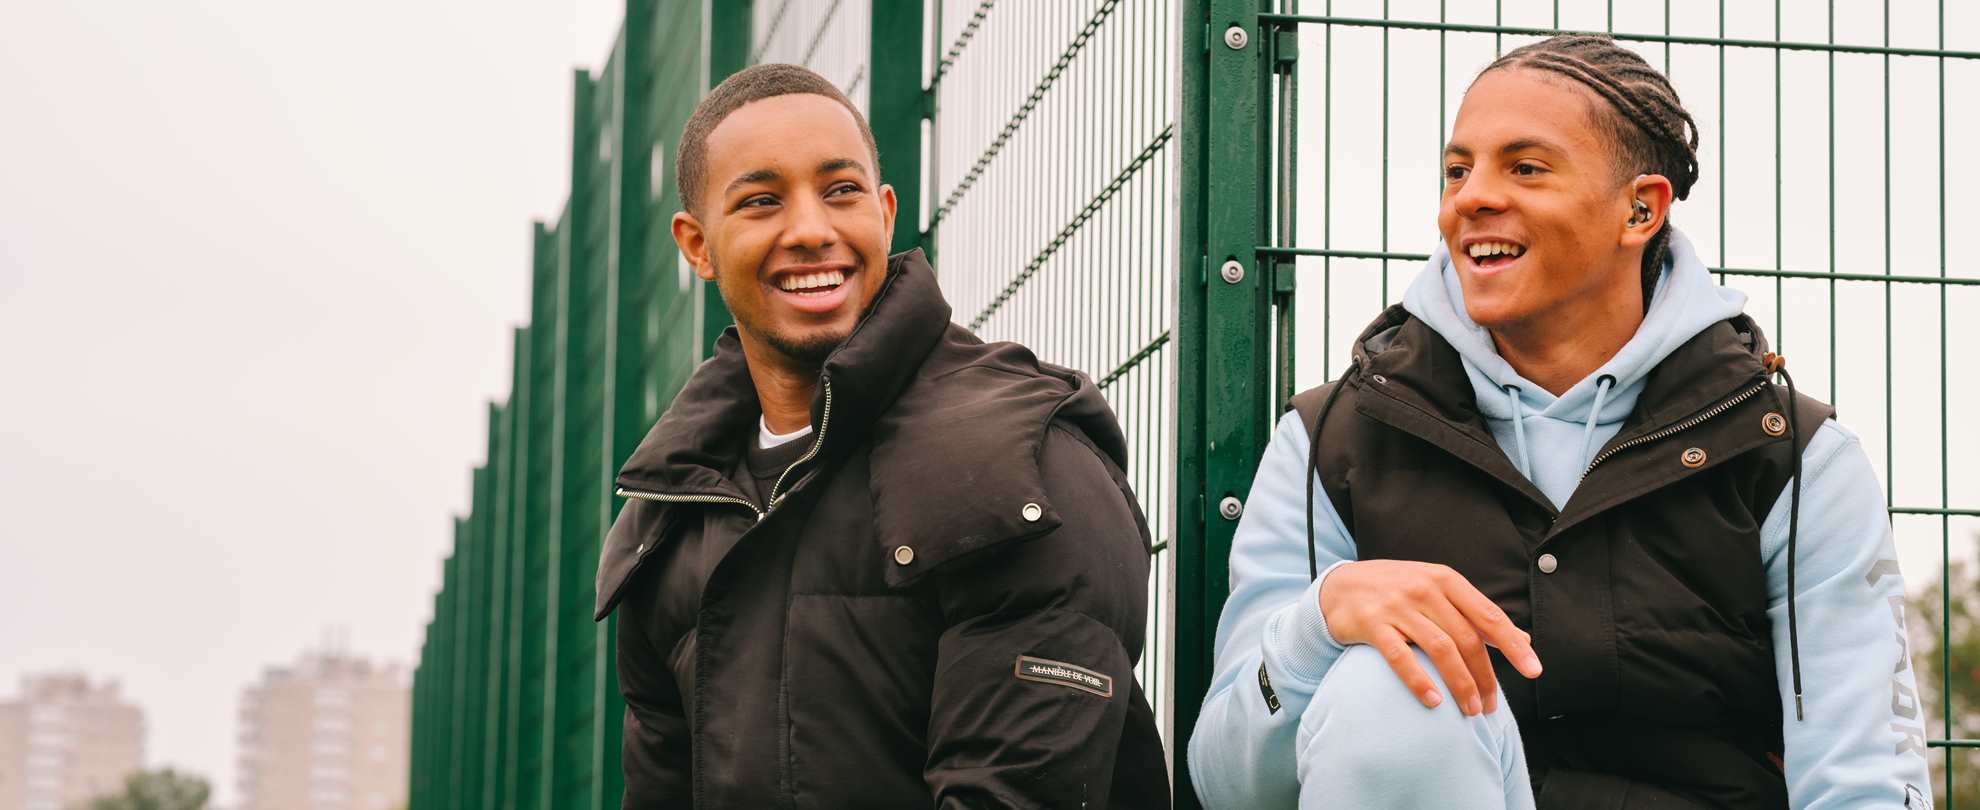 A young Black teenage boy wearing a hearing aid. He is laughing with a young Black man in the park.